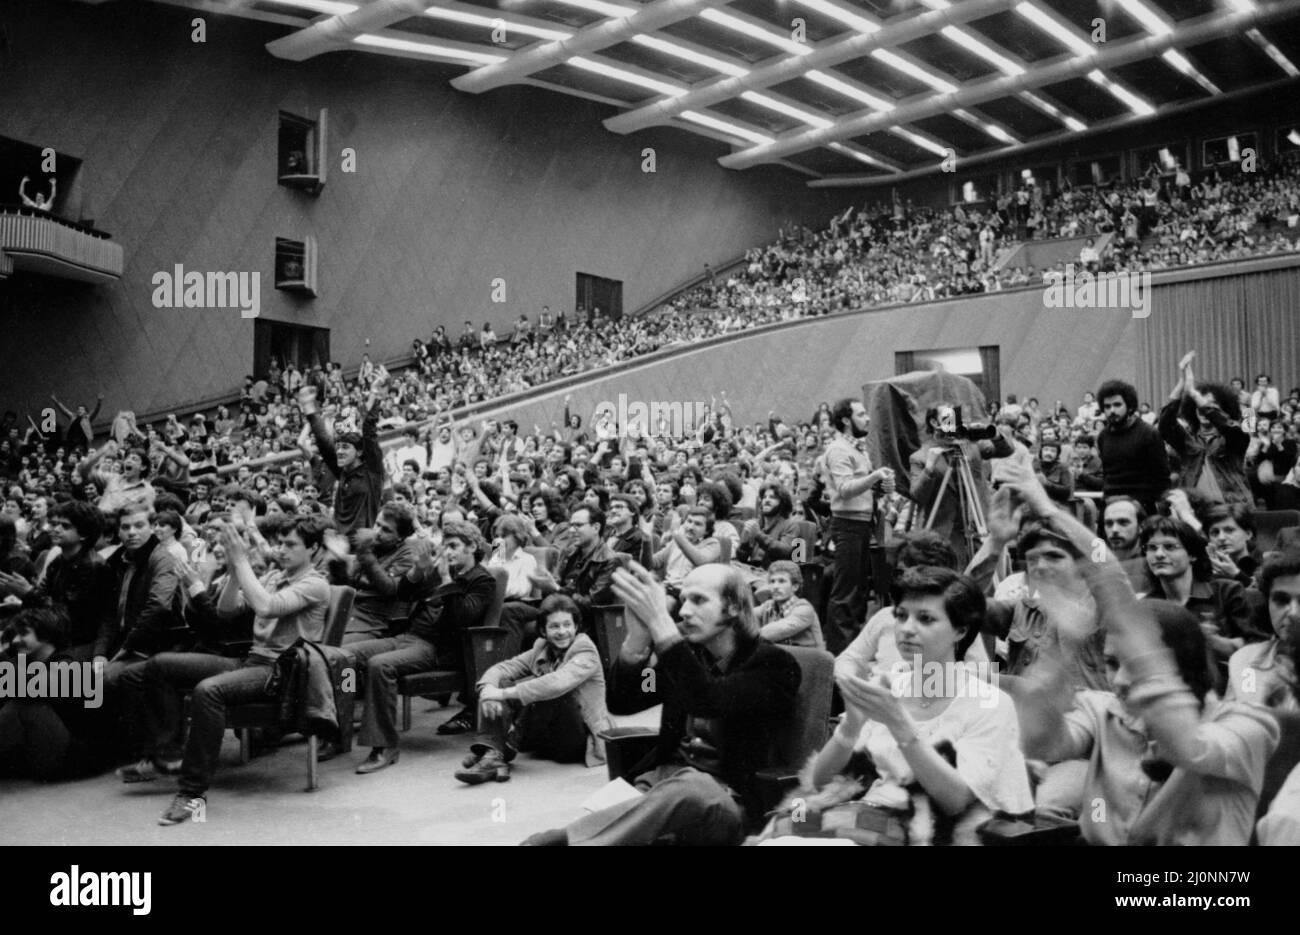 Bucharest, Romania, approx. 1974. Full house inside the Polyvalent Hall during a concert. Stock Photo